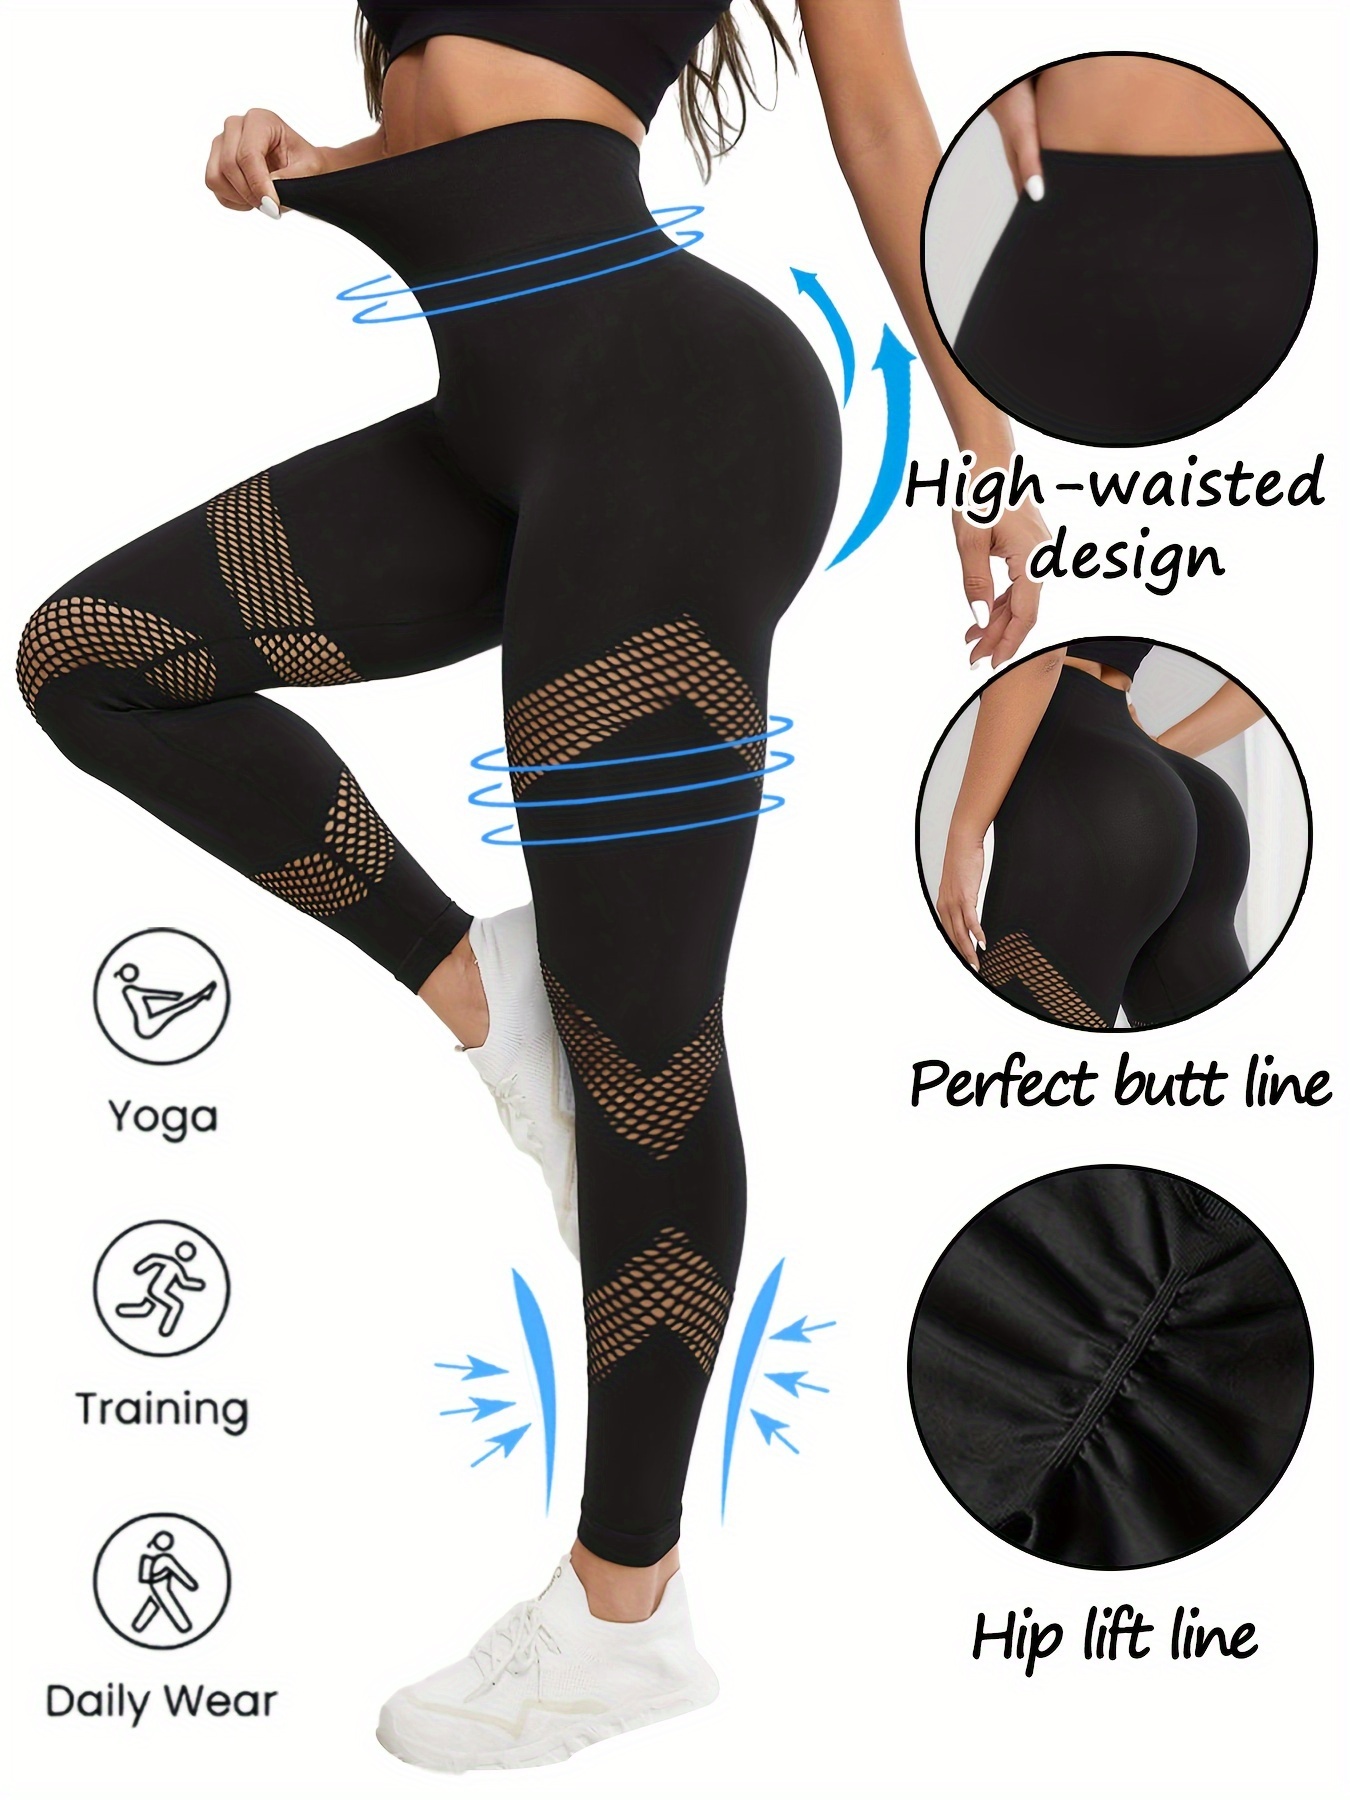 High Waist Butt Lifting Leggings With Side Pockets - Soft And Stretchy  Women's Activewear